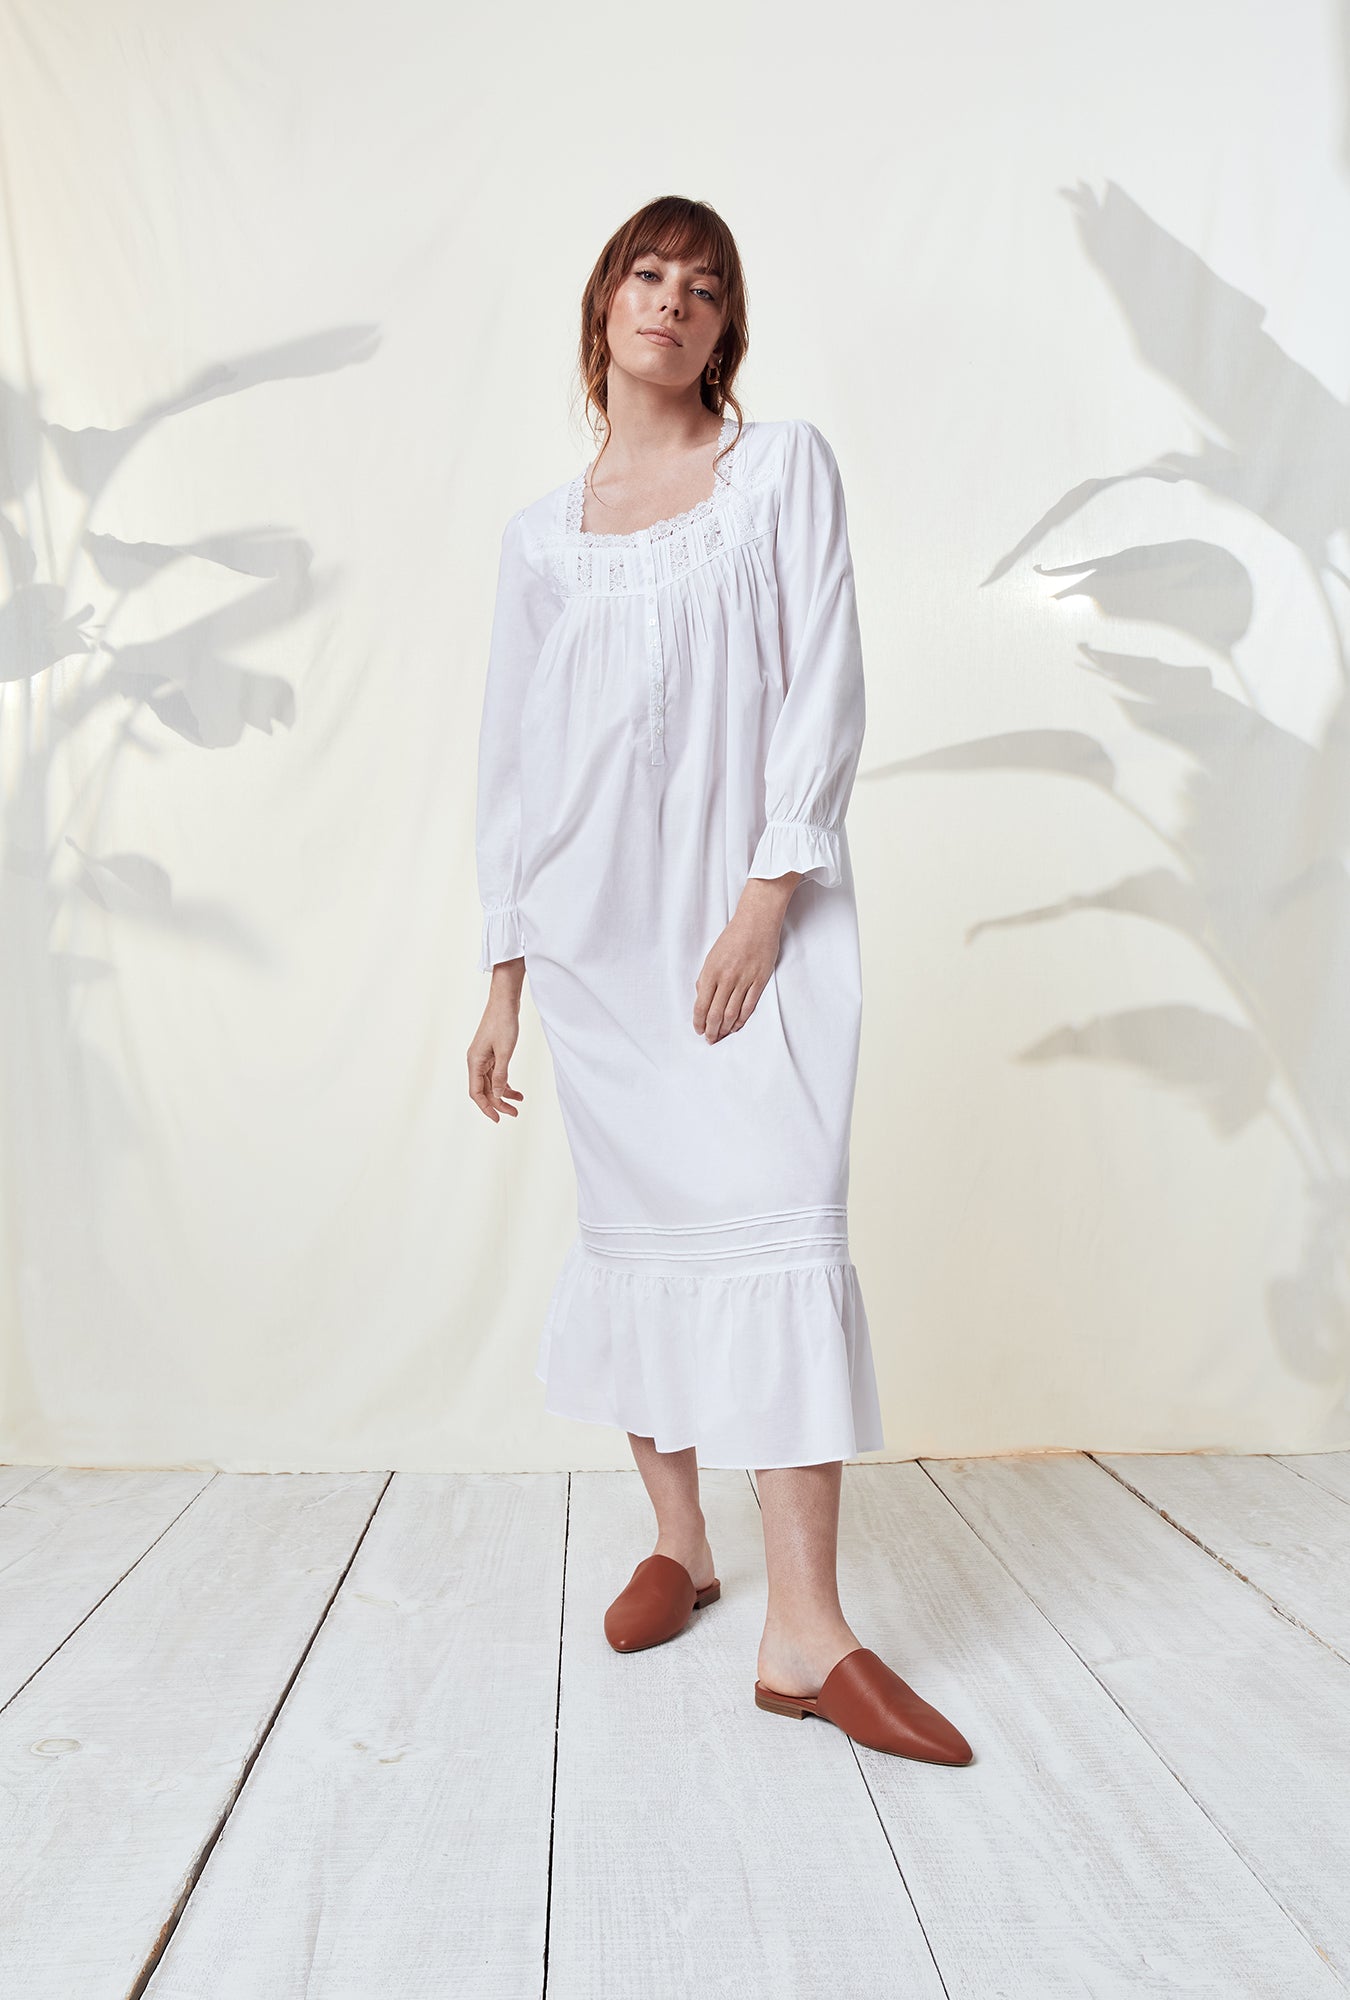 A lady wearing a white long sleeve nightgown.